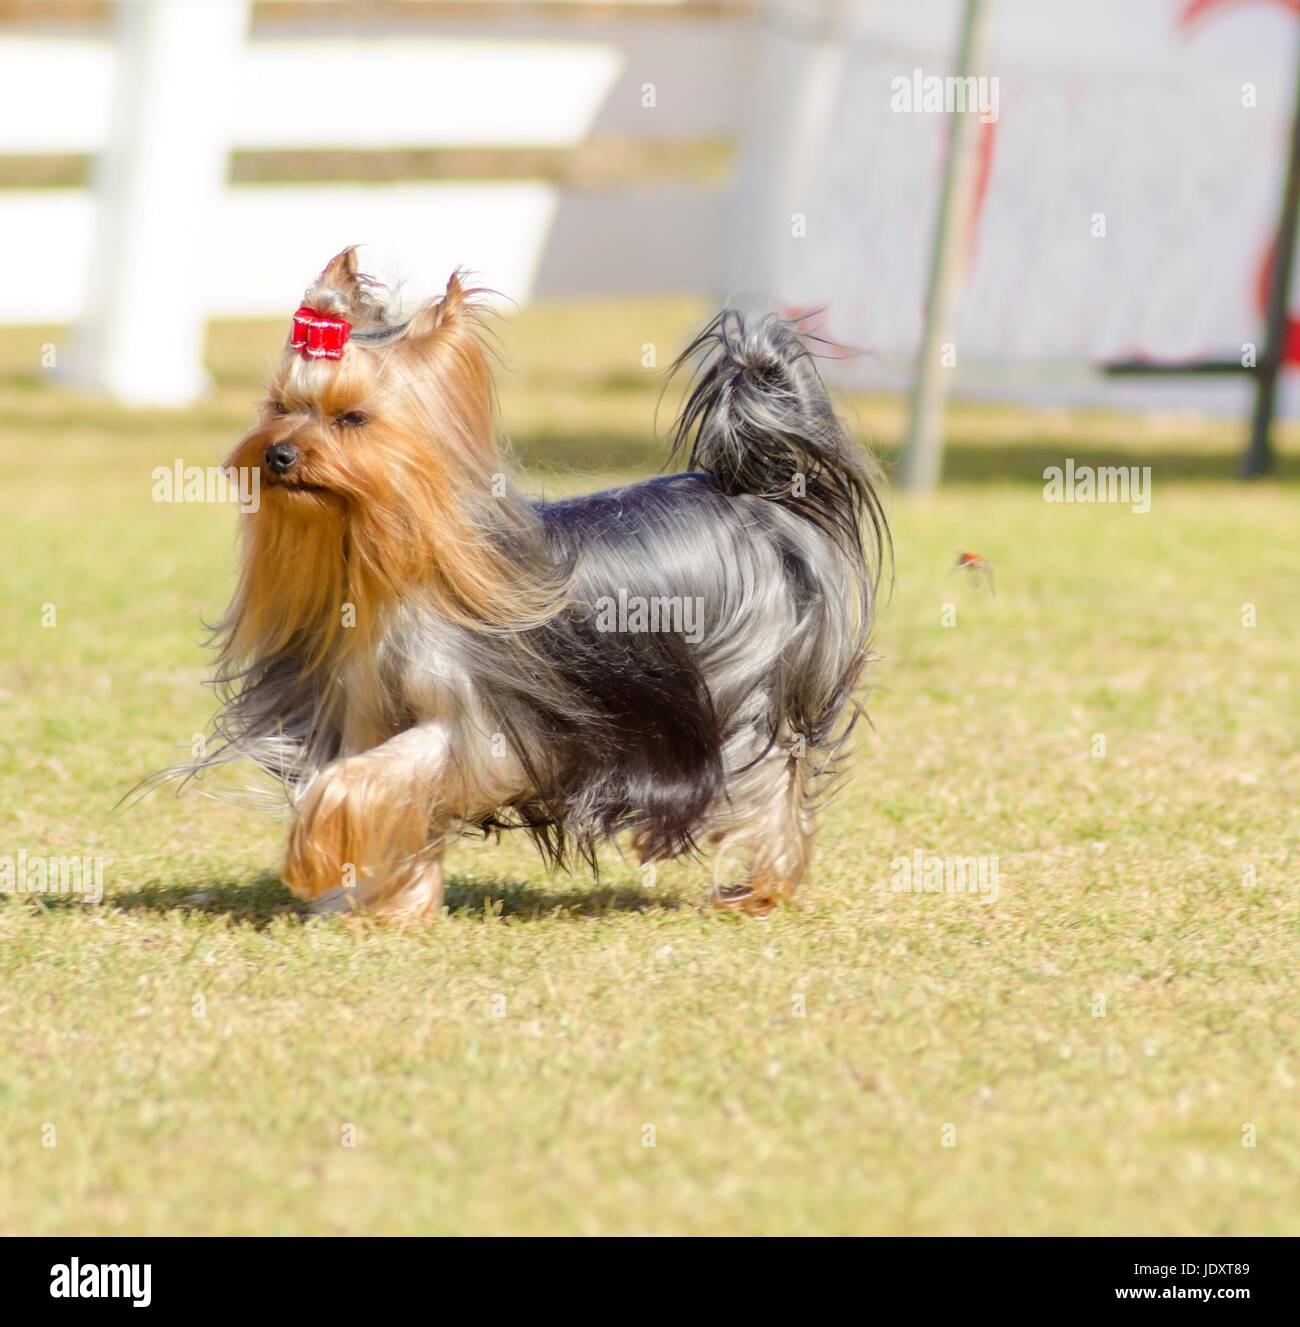 A small gray black and tan Yorkshire Terrier dog walking on the grass, with its head coat braided. The yorkie is a companion dog with glossy, fine, silky and straight hair with hypoallergenic coat. Stock Photo